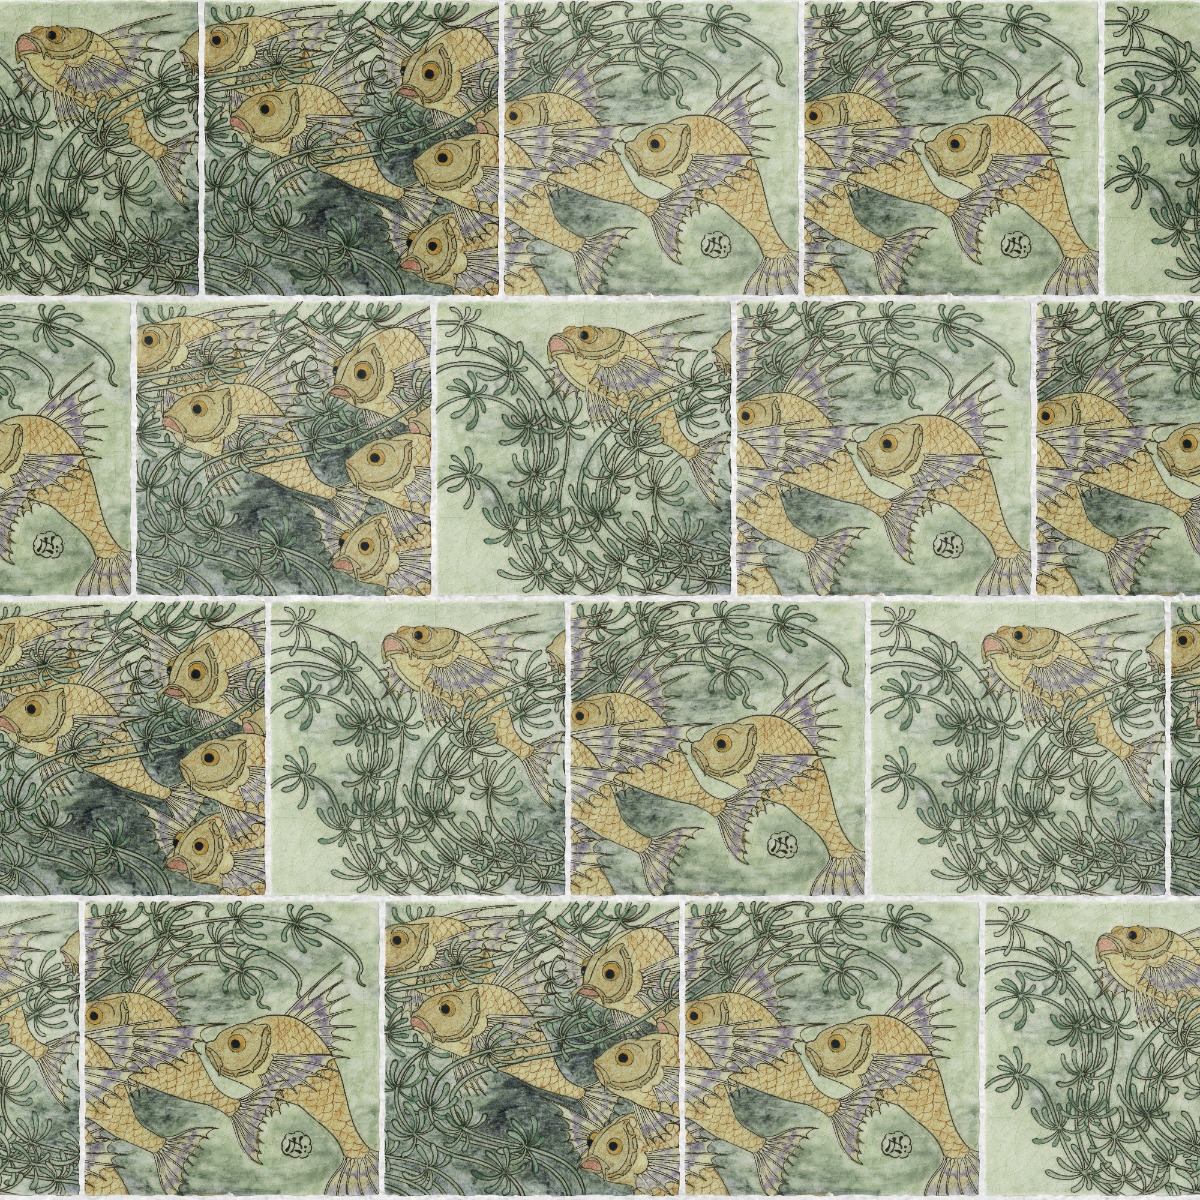 A seamless tile texture with fish in seaweed tile tiles arranged in a Staggered pattern